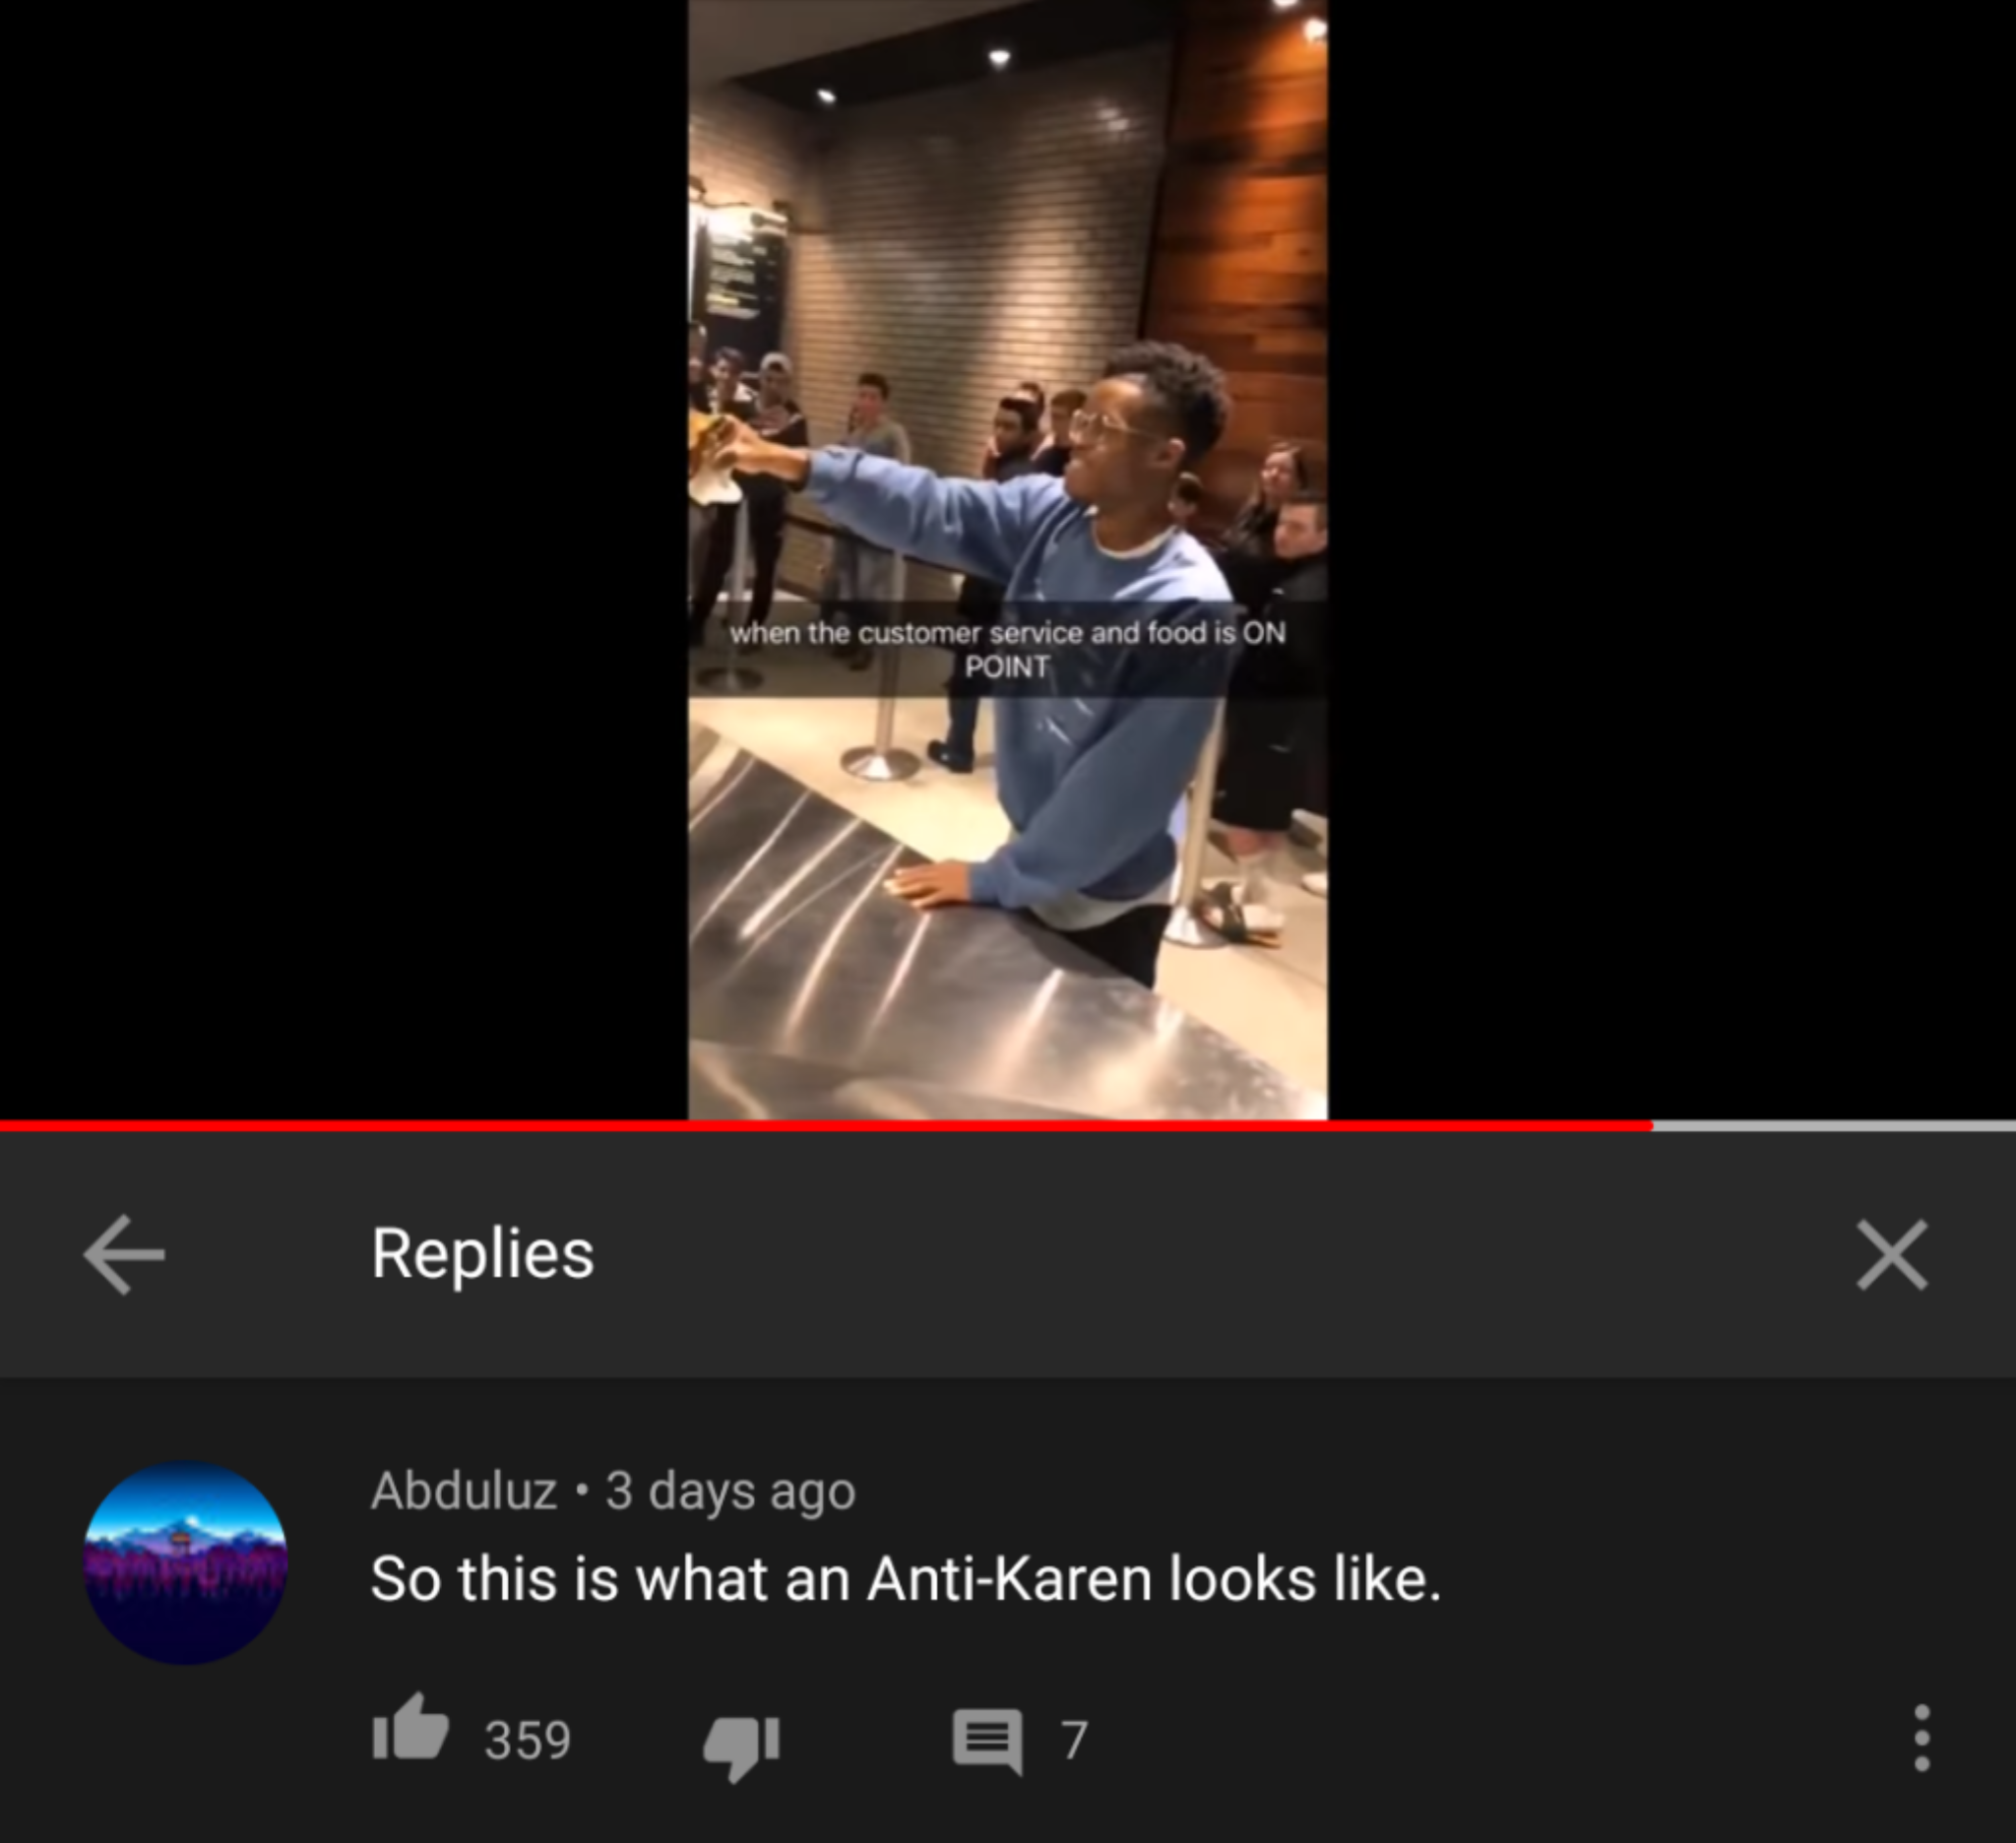 screenshot from a youtube video along with a comment from user abduluz that reads "So this is whan an Anti-Karen looks like."